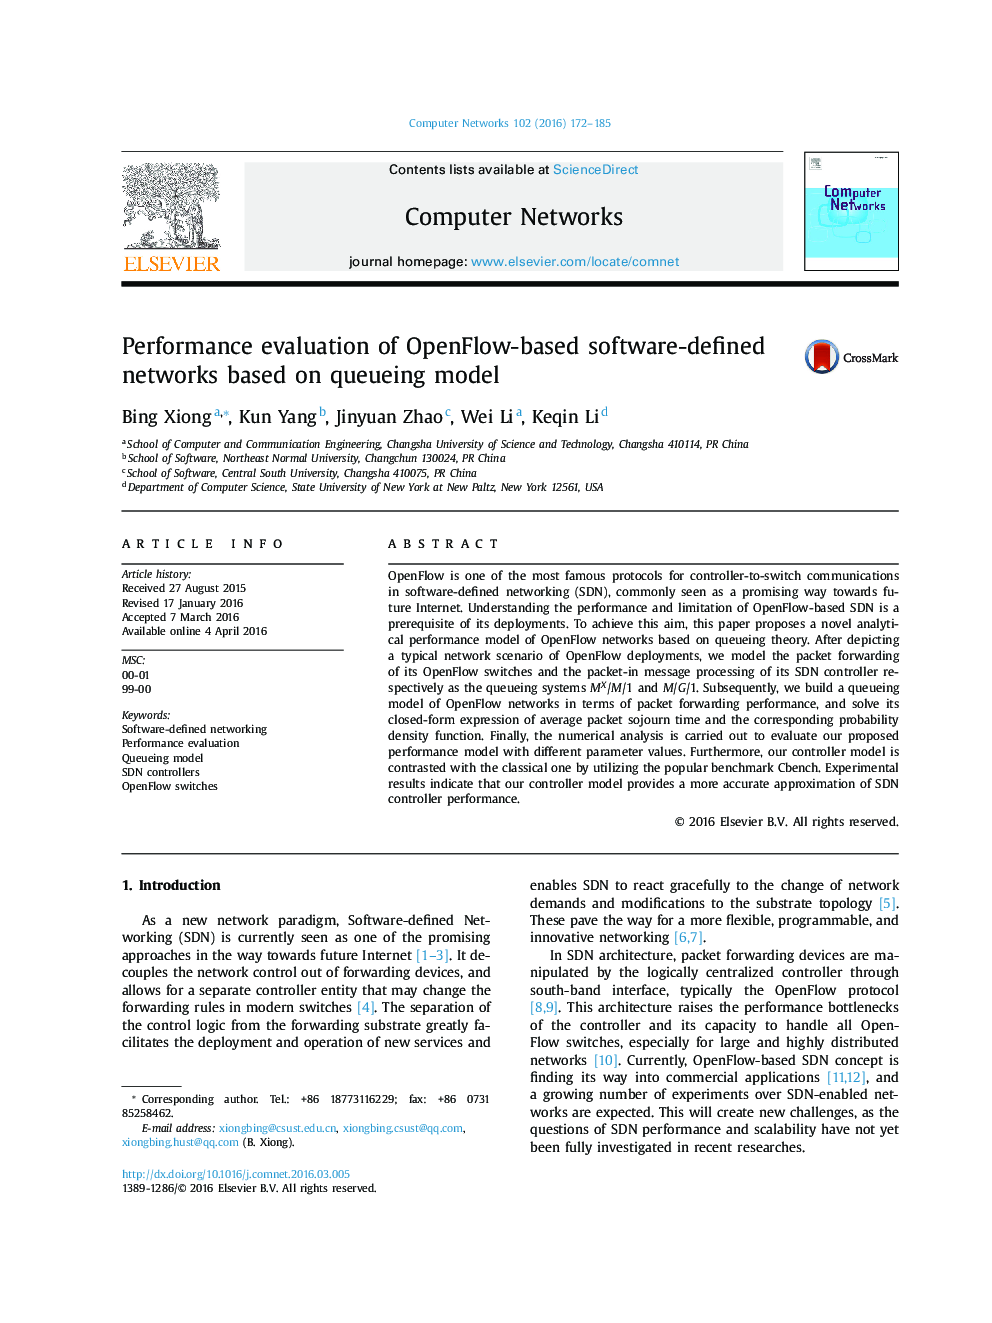 Performance evaluation of OpenFlow-based software-defined networks based on queueing model